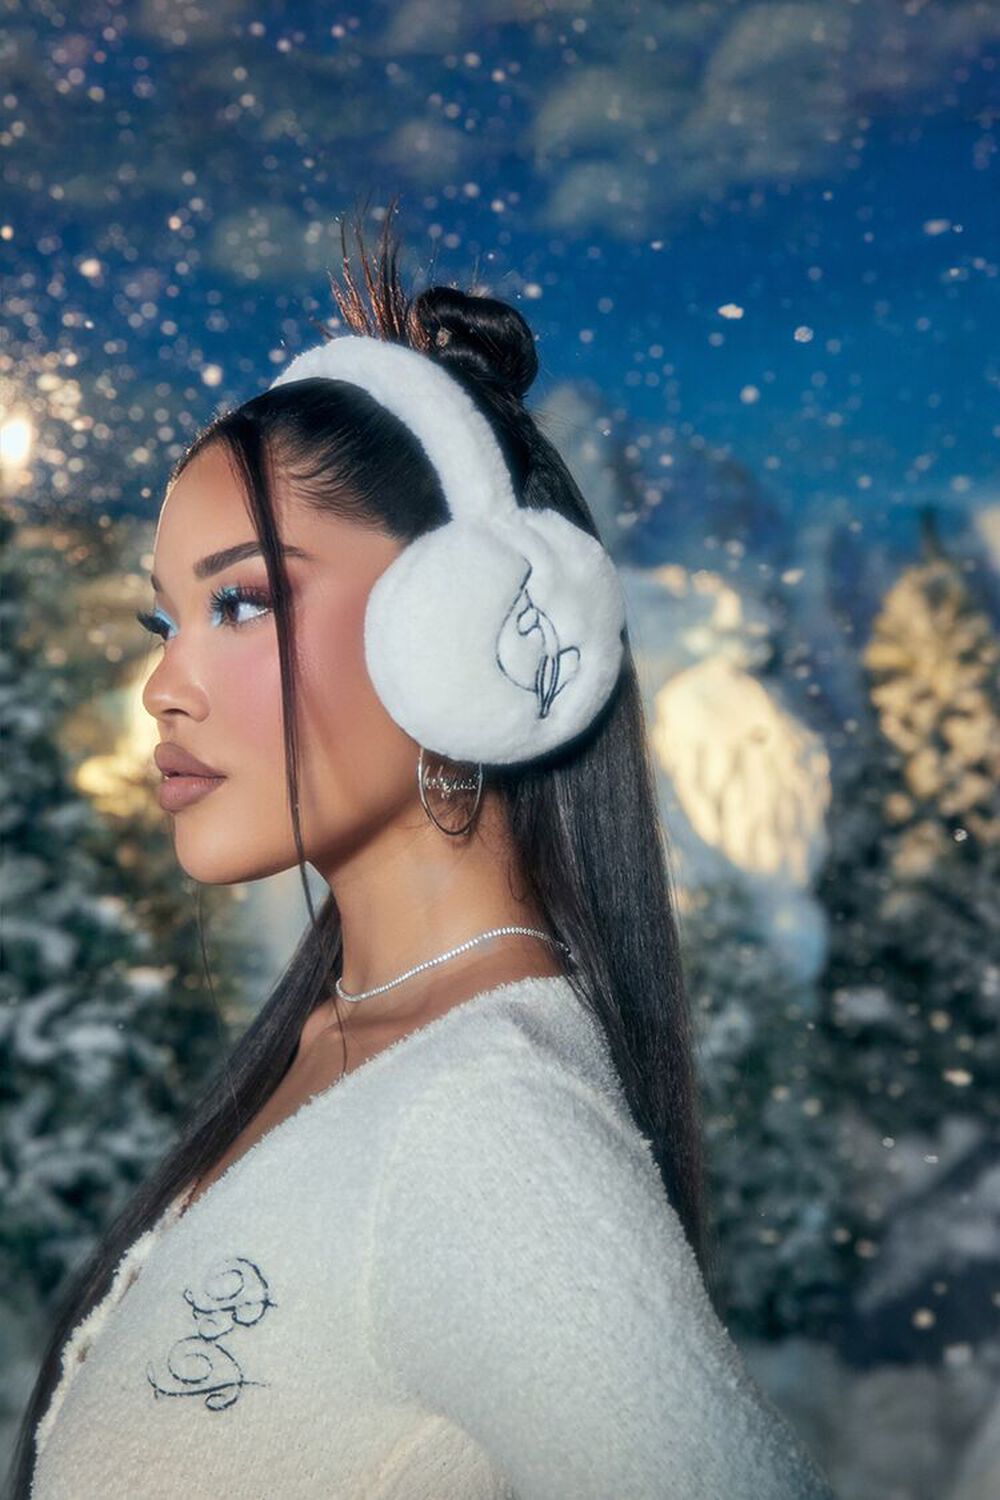 Y2K Pink & White Laced Up Earmuffs